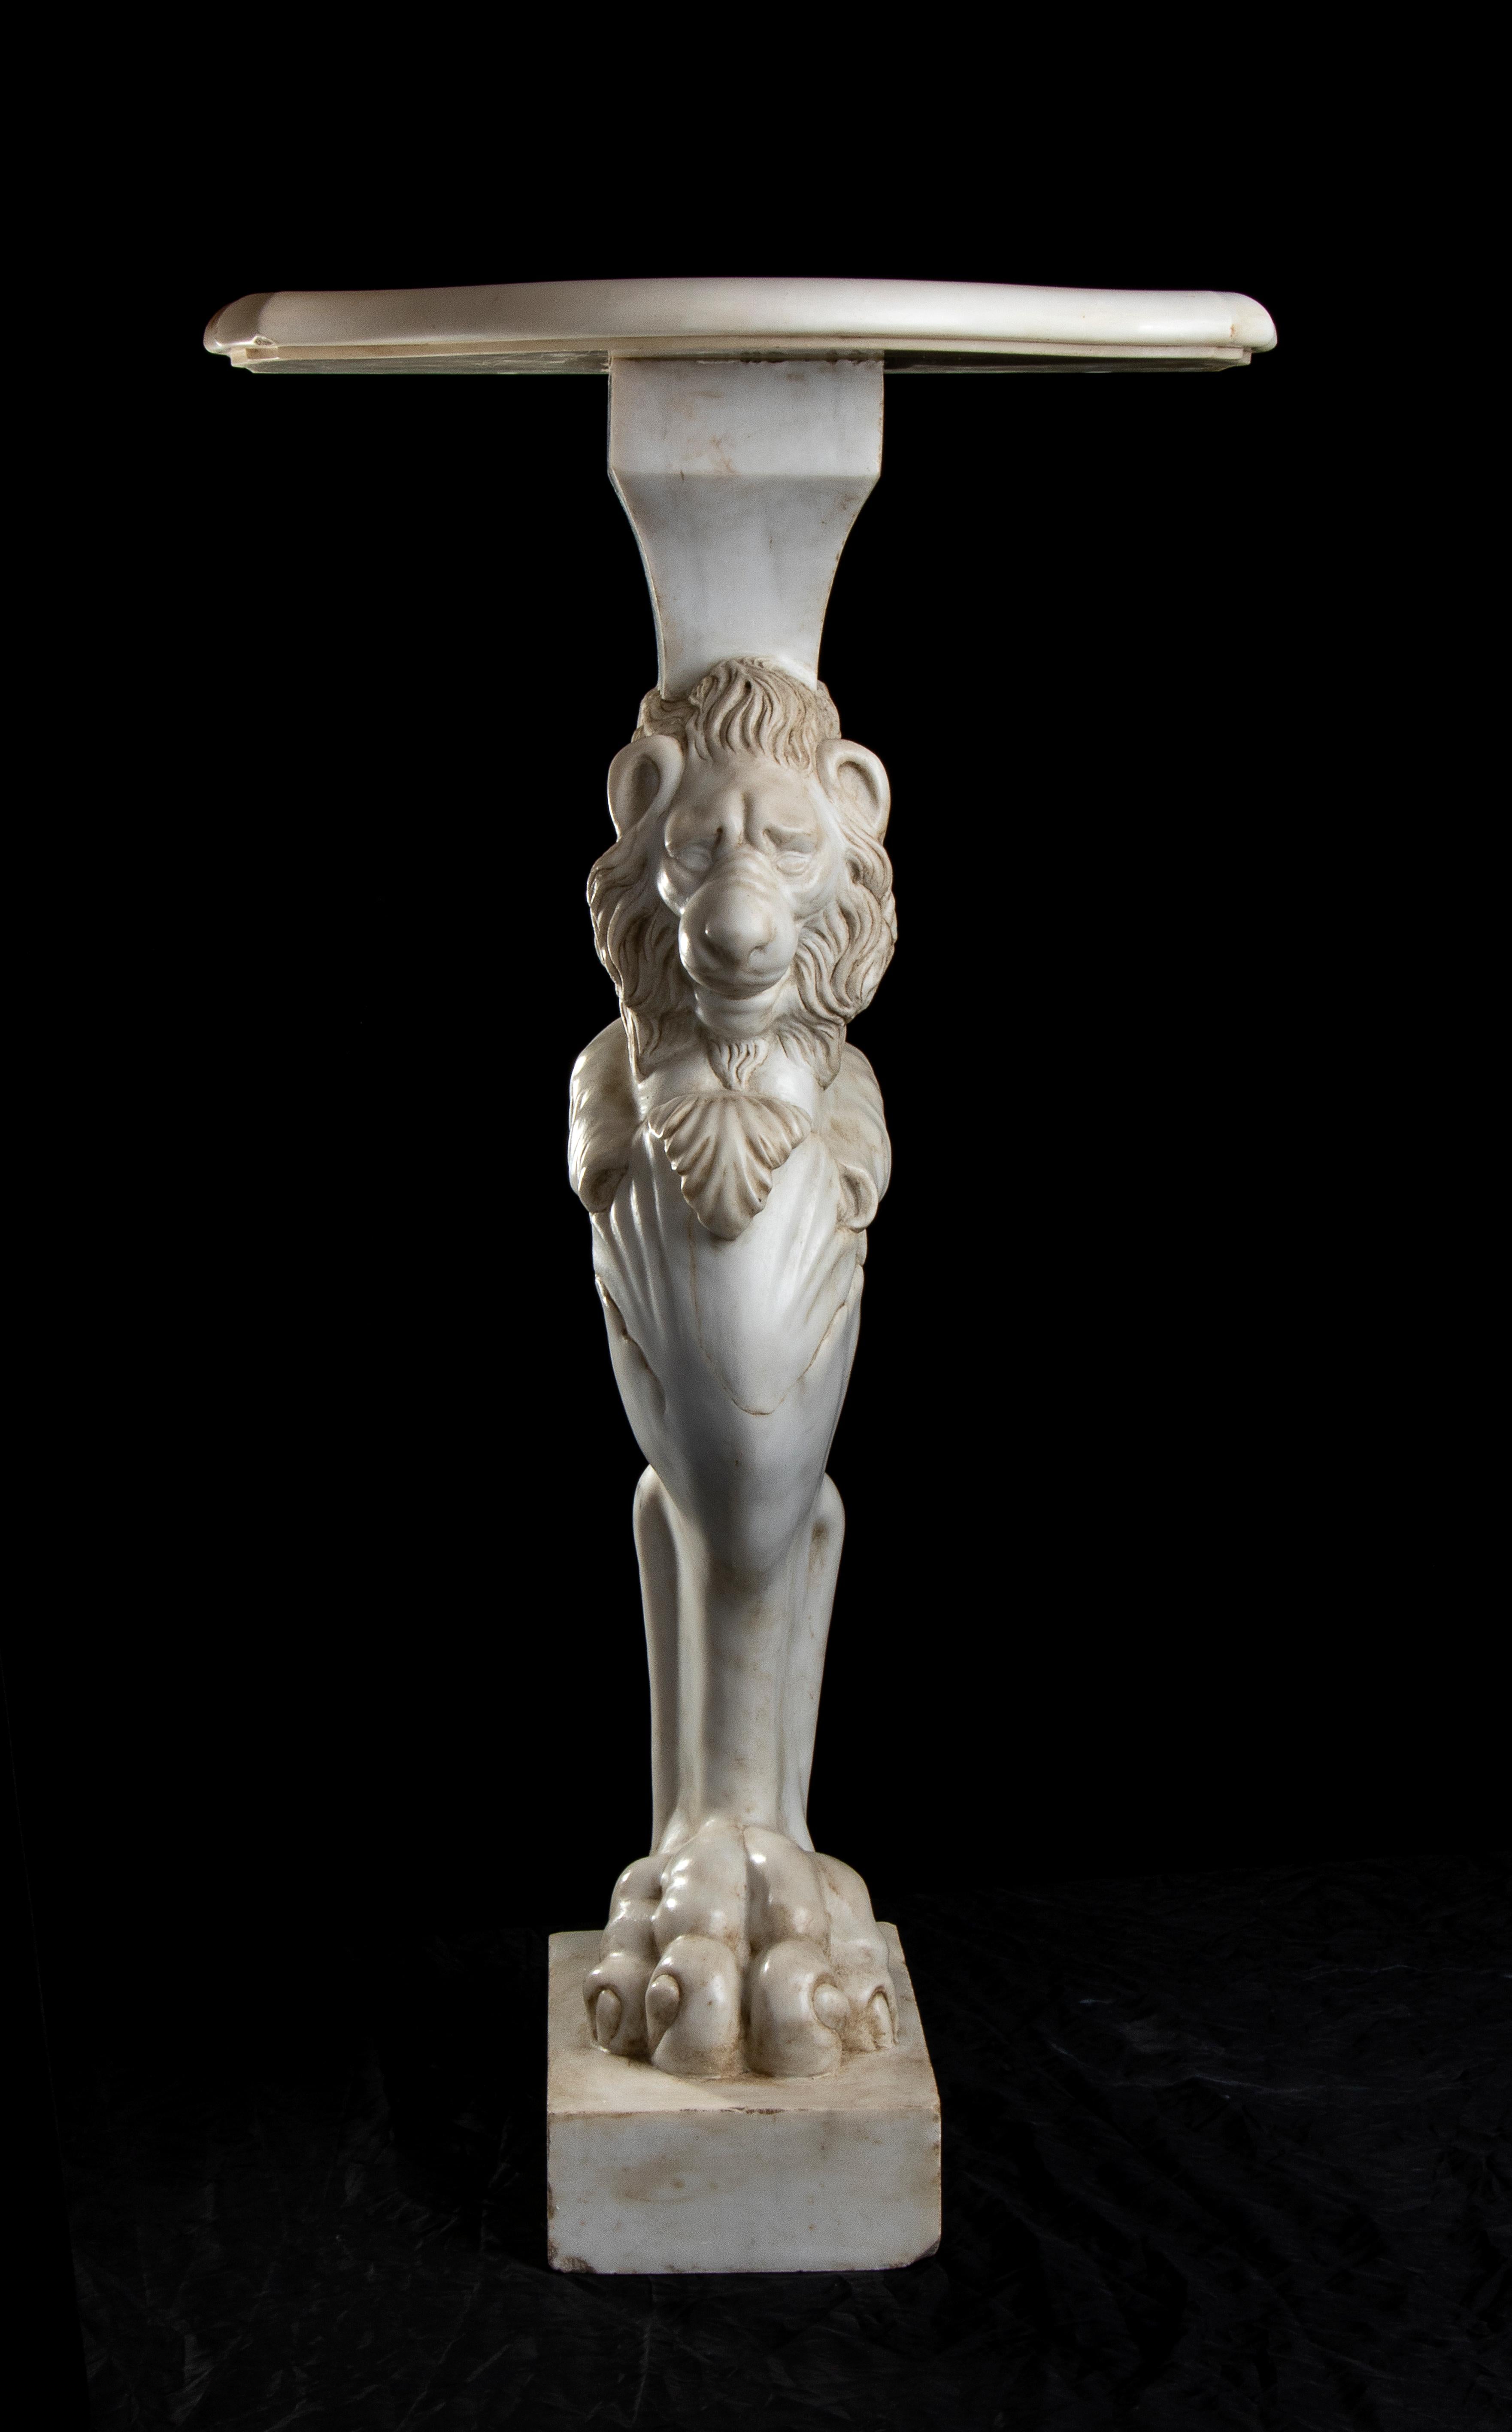 White Marble Pair of Sculptures With Heads of Lions and Ferals Feet Roman Style - Black Figurative Sculpture by Unknown